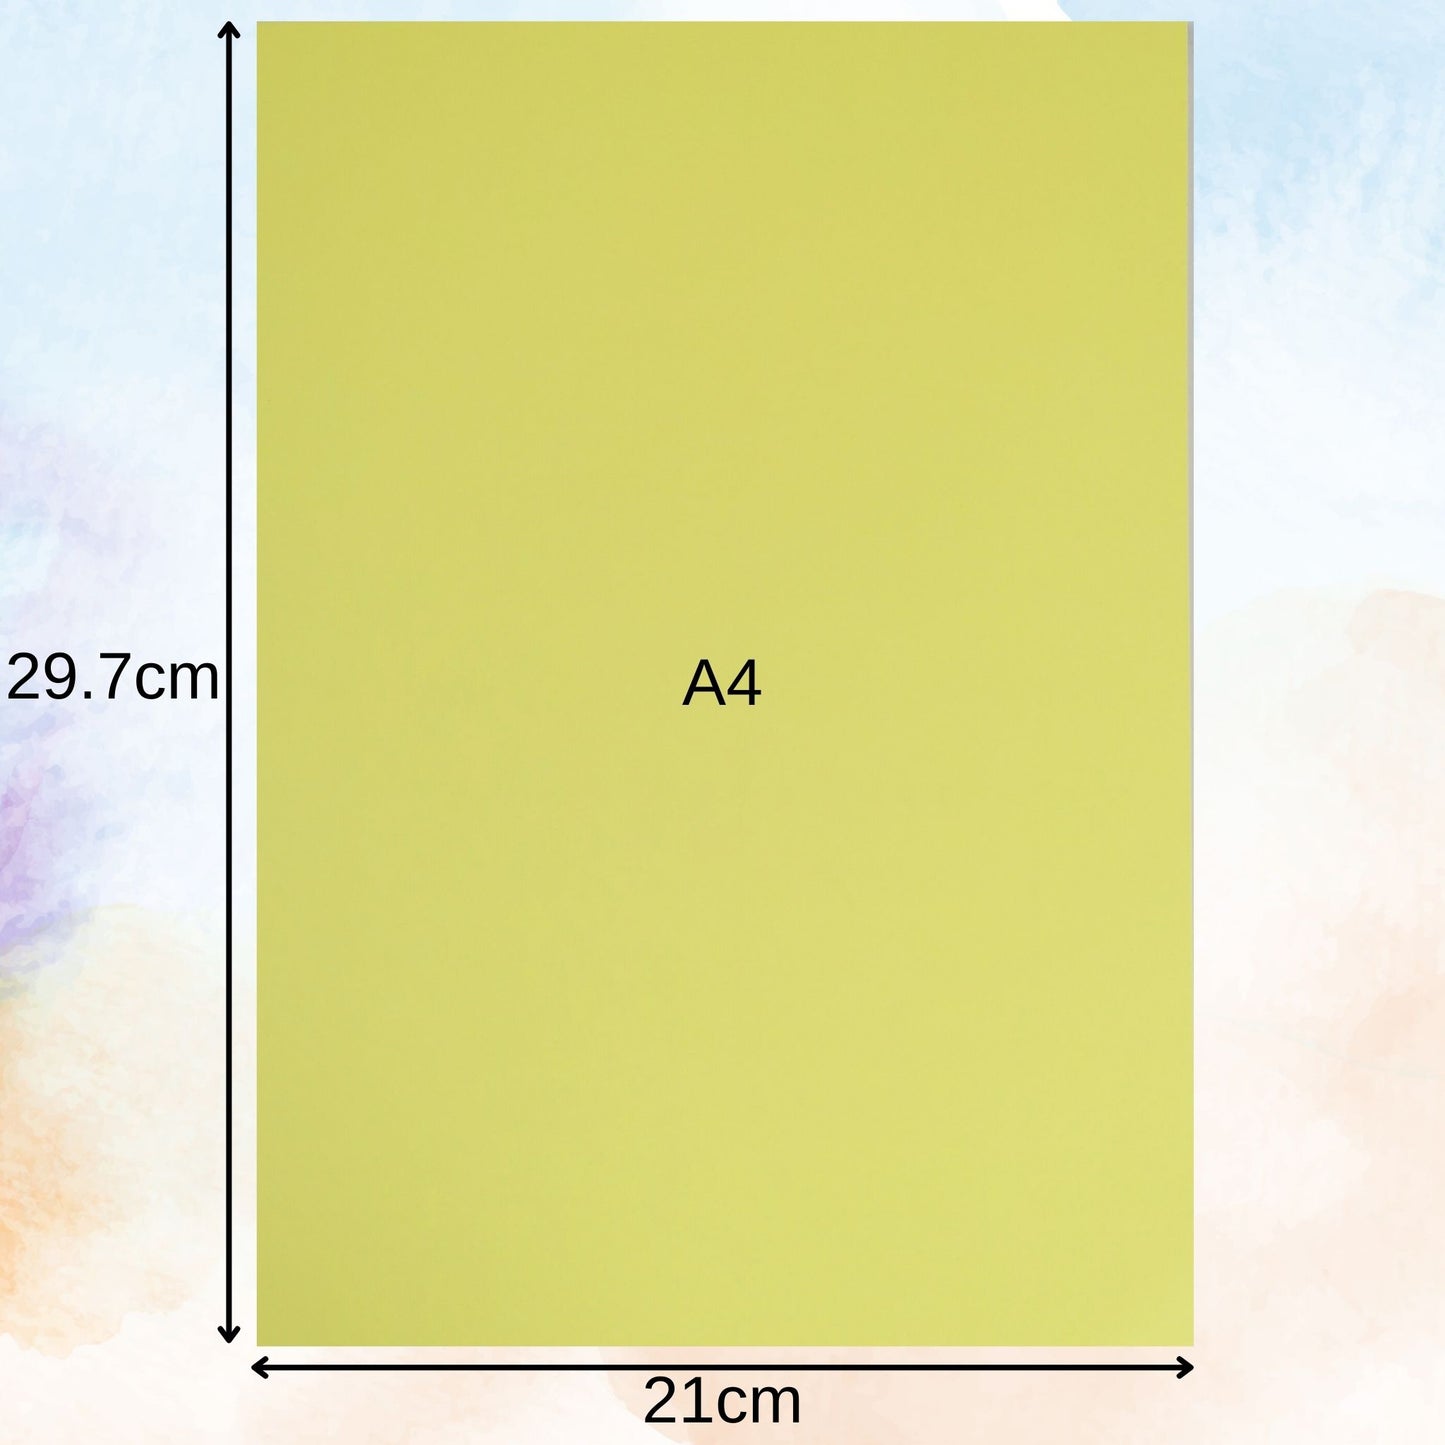 Smooth A4 Craft Card 160gsm 100 Sheets Choose Colour